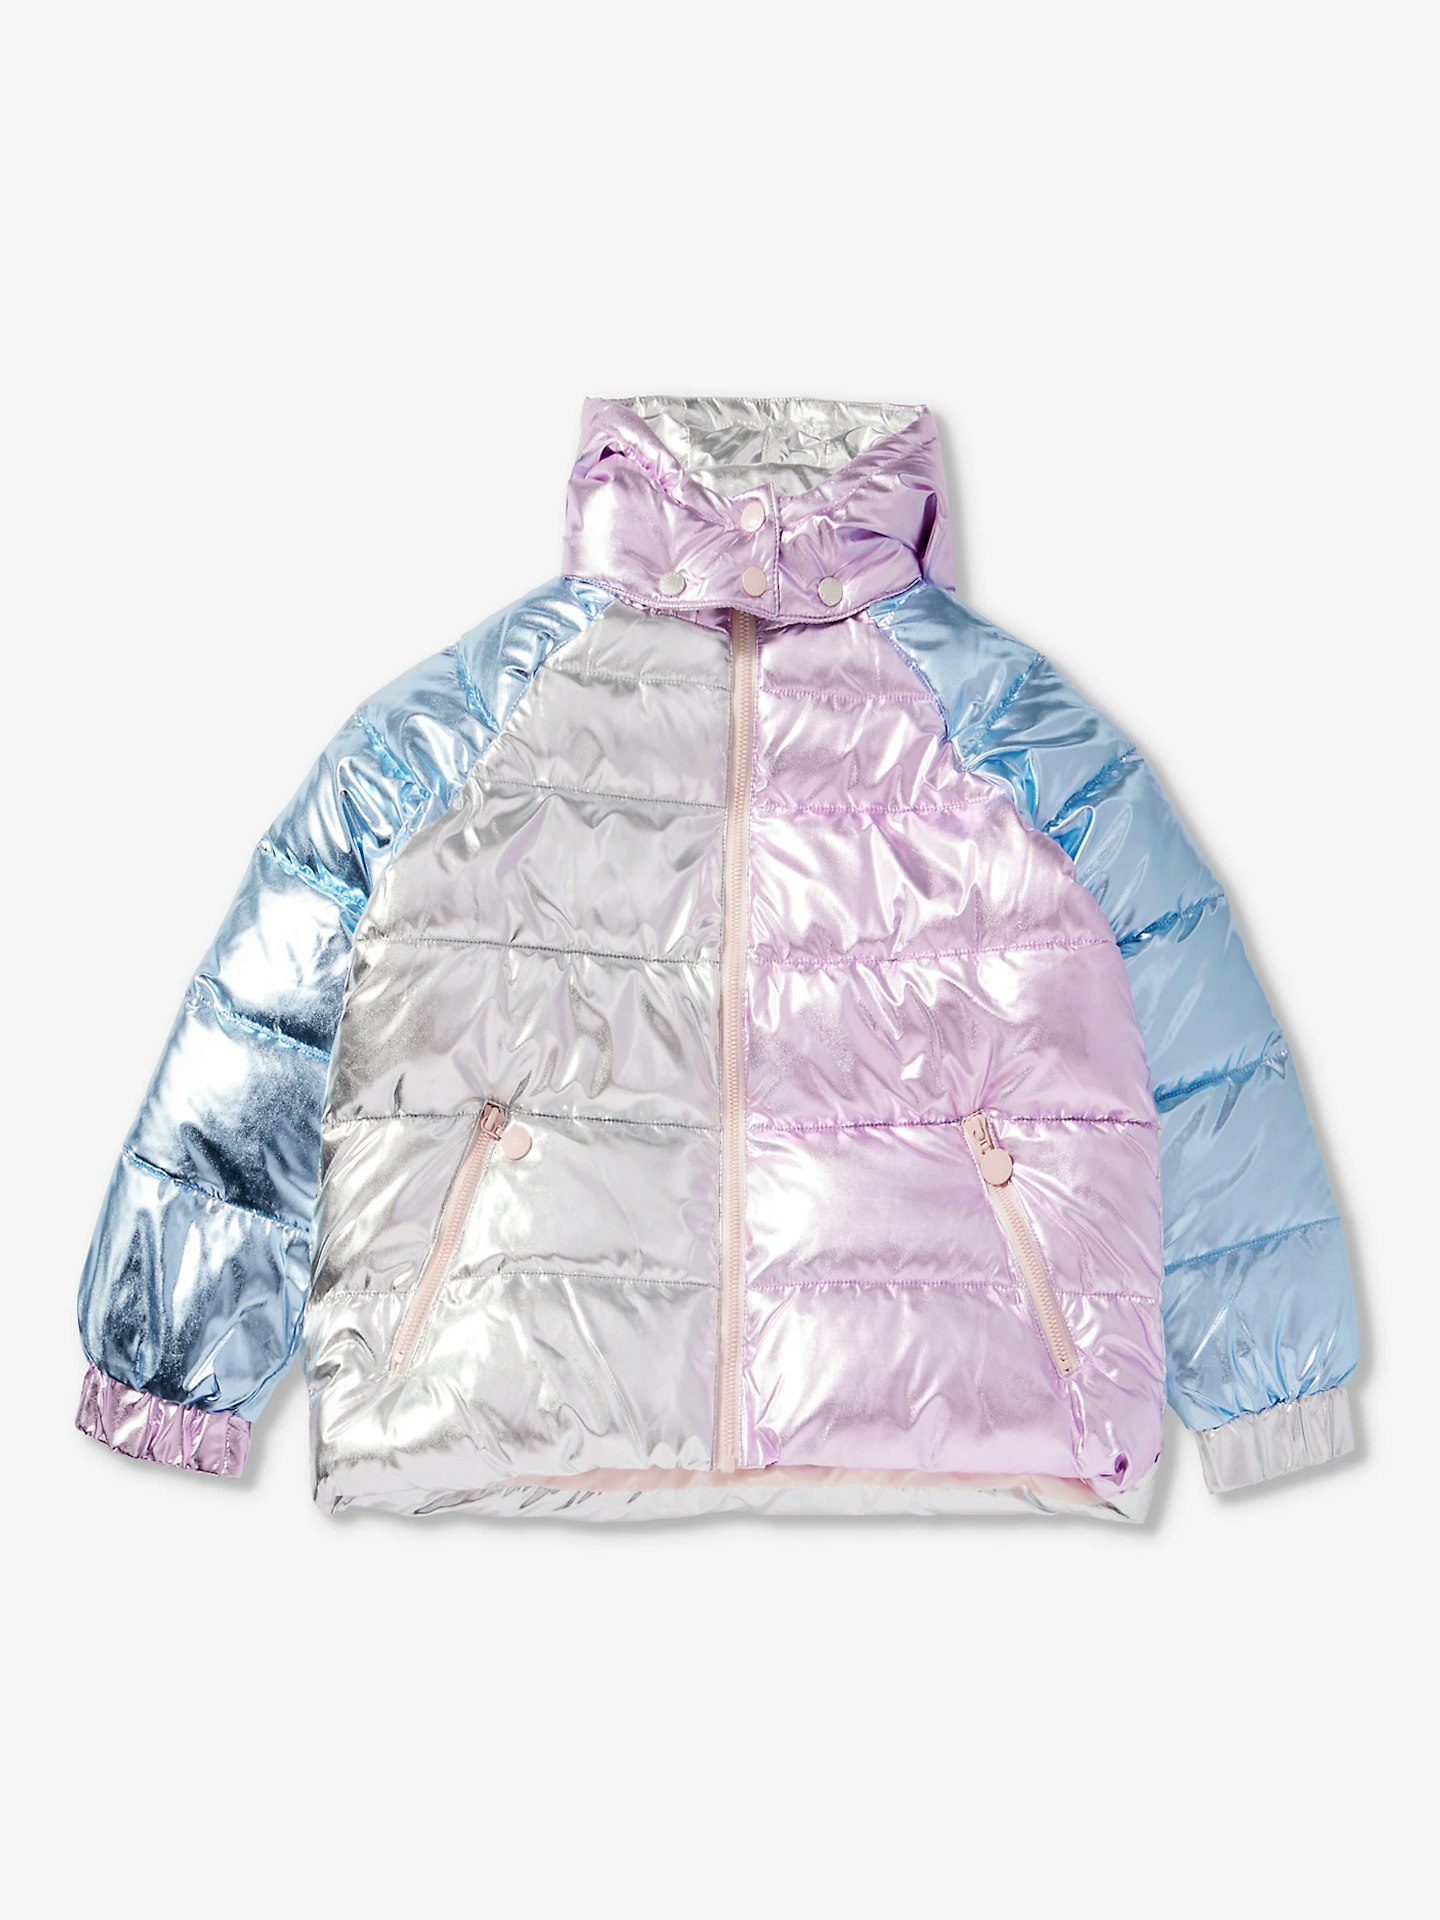 Stella McCartney, Metallic Quilted Recycled Polyester Jacket